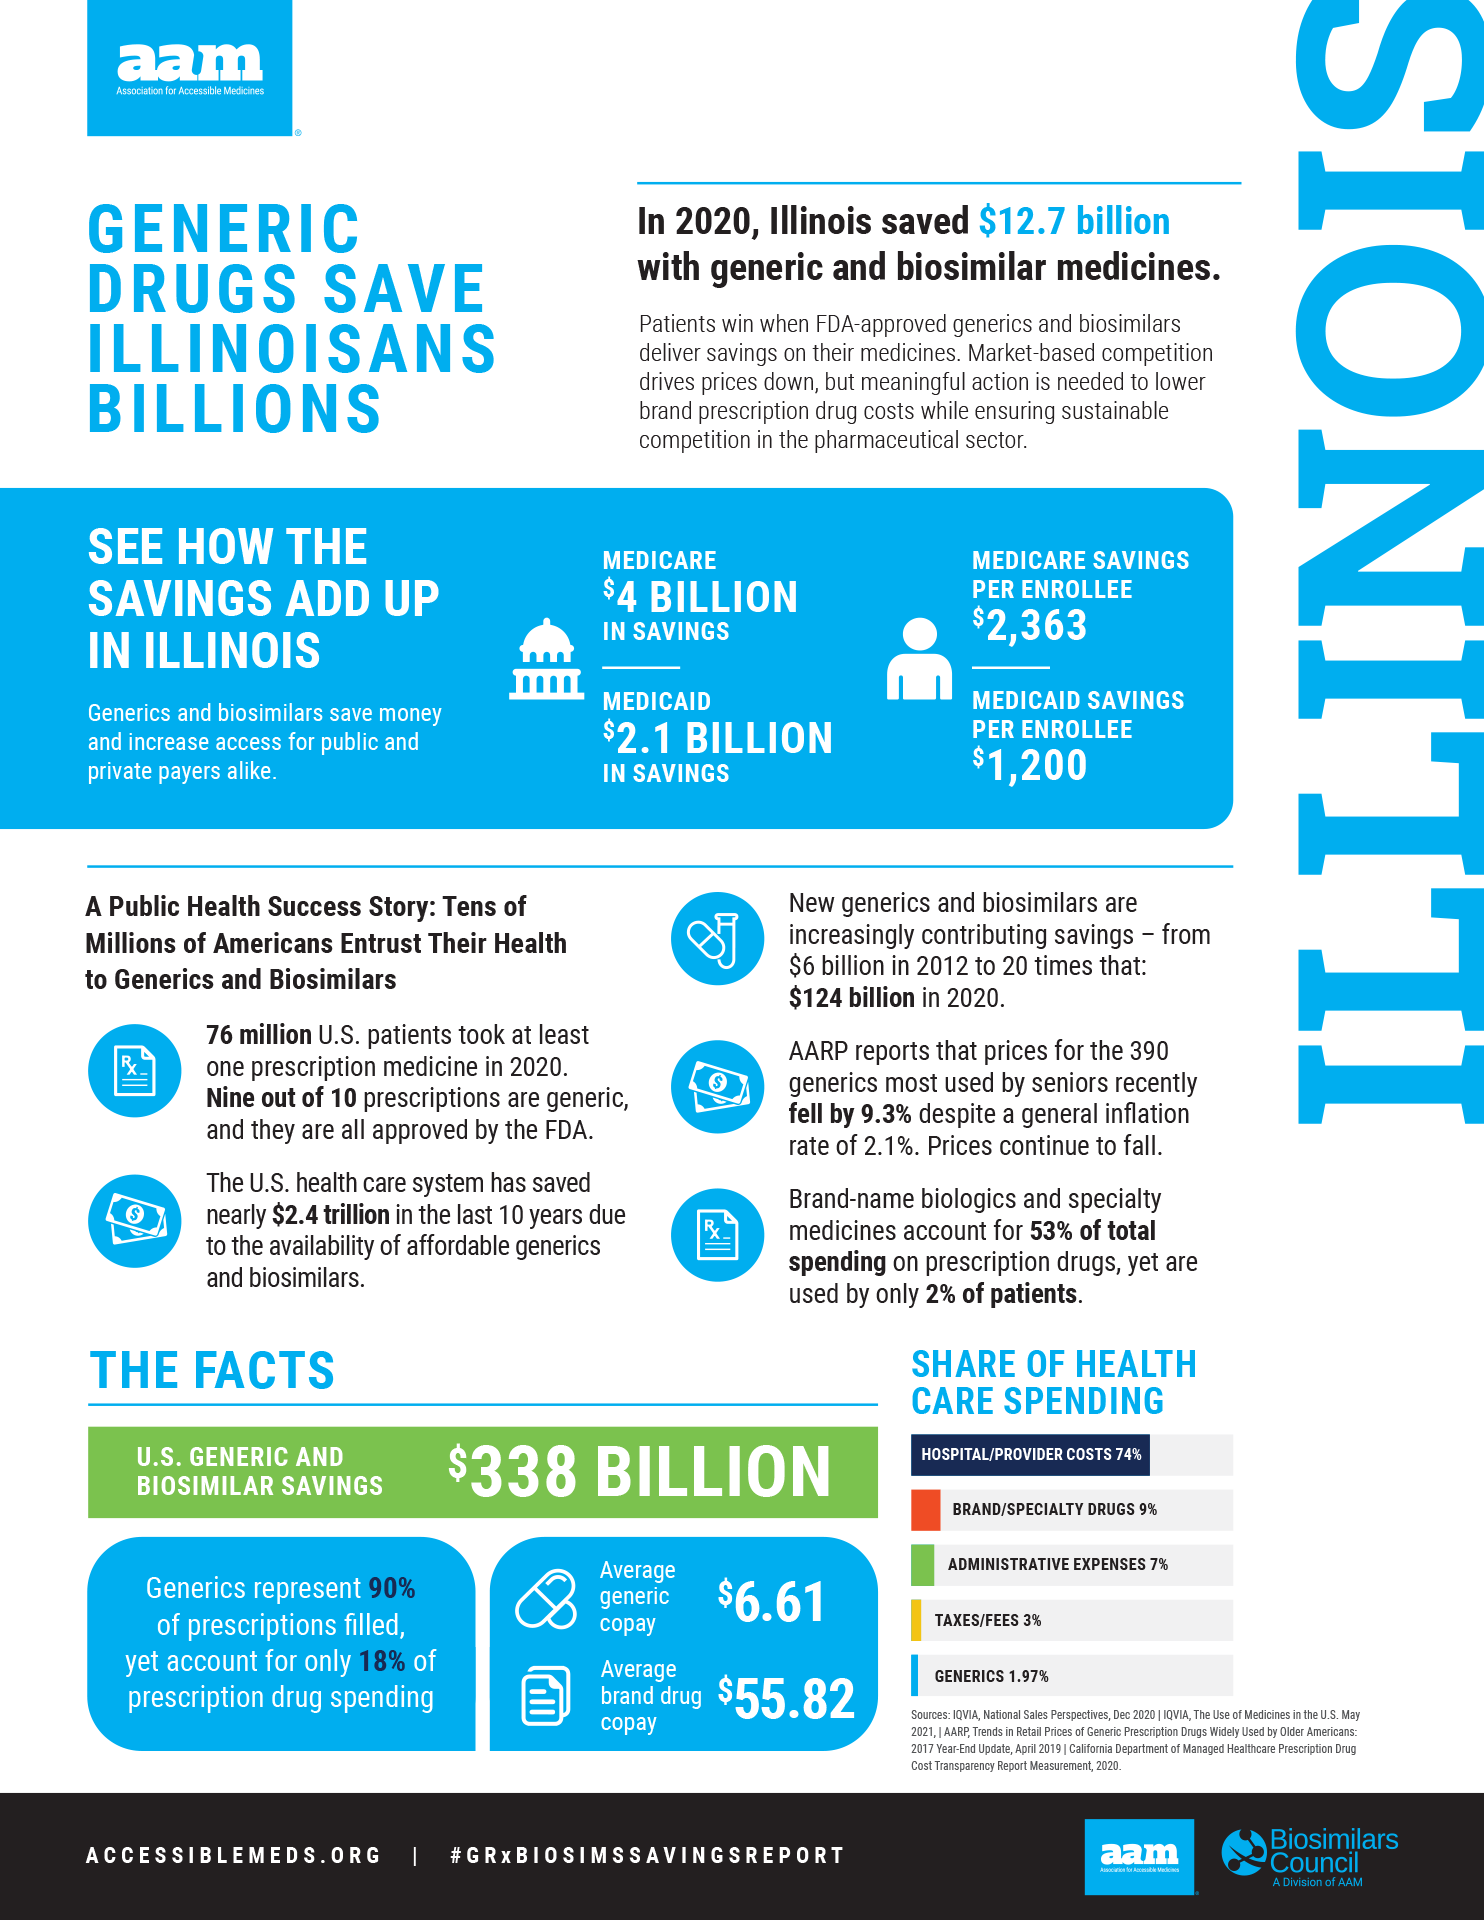 In 2020, Illinois saved $12.7 billion with generic and biosimilar medicines.